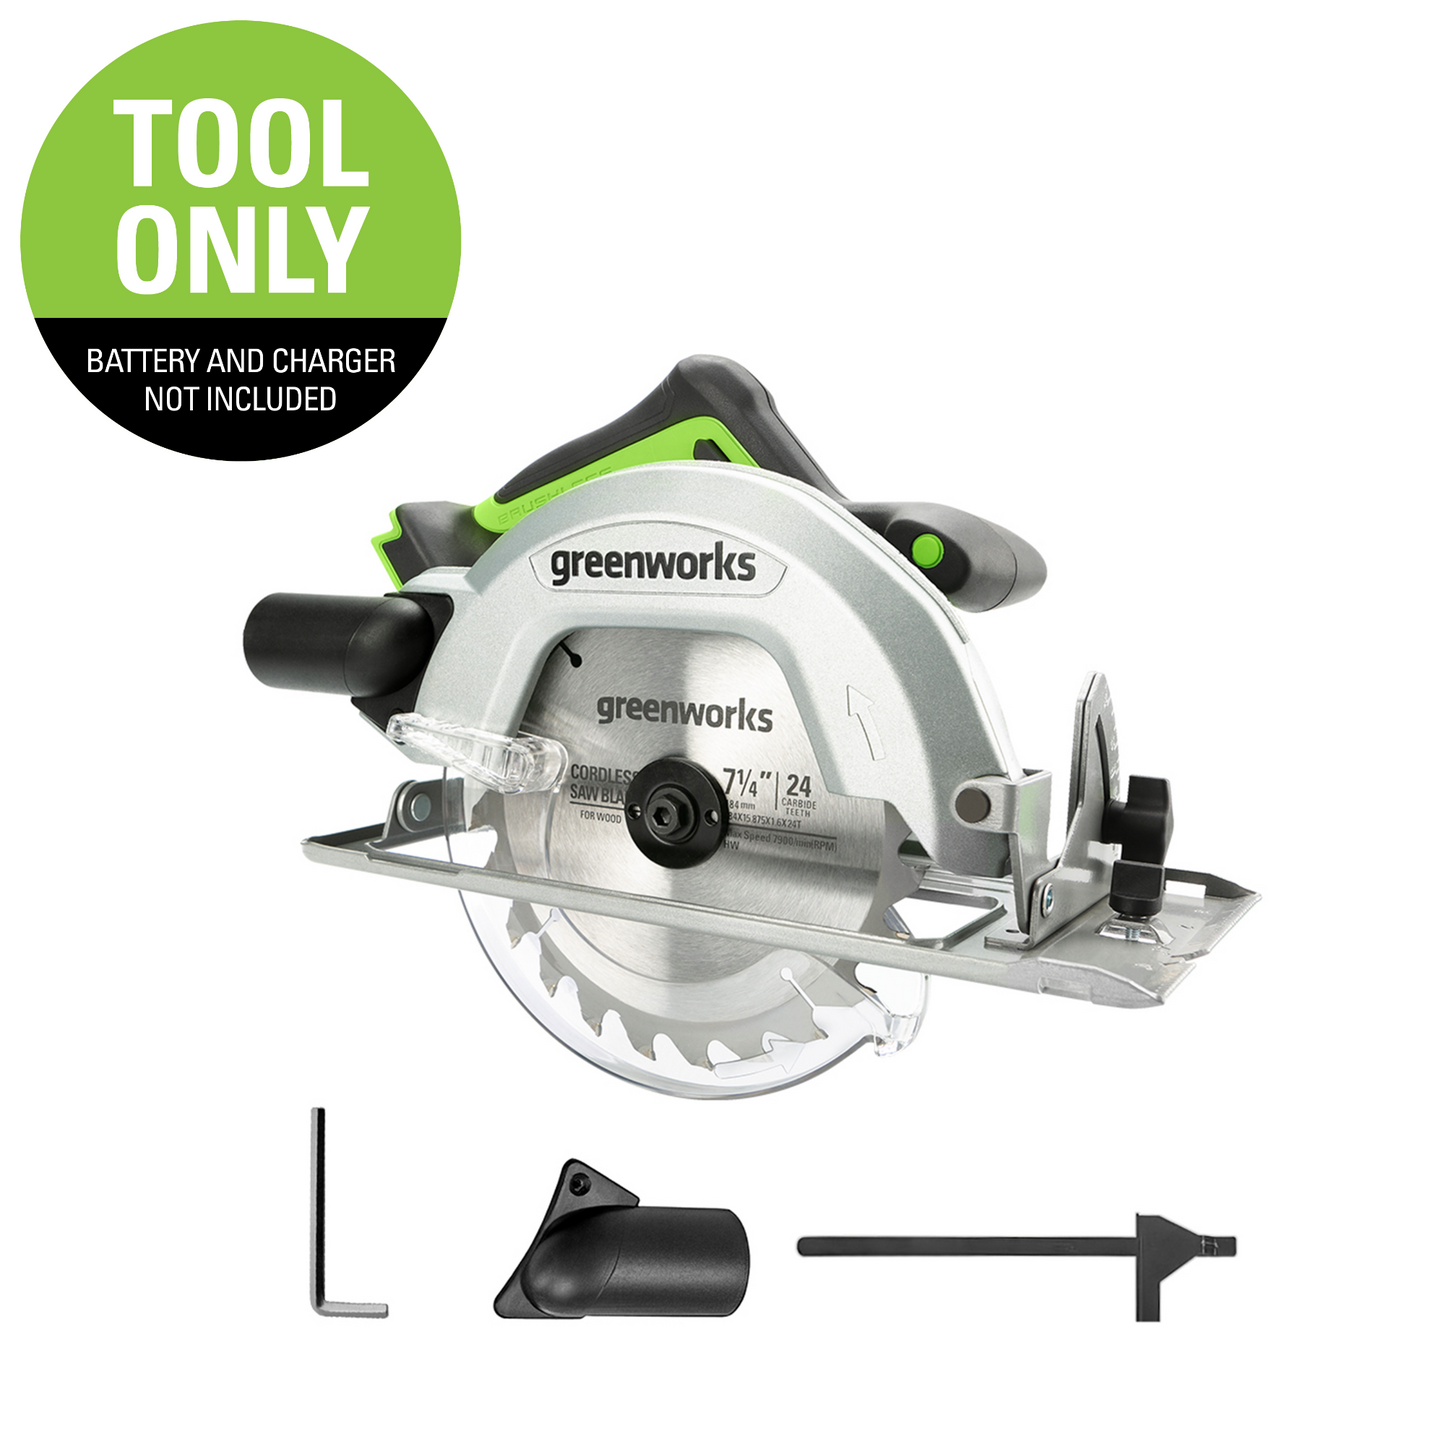 Black and Decker Cordless Circular Saw Not Working